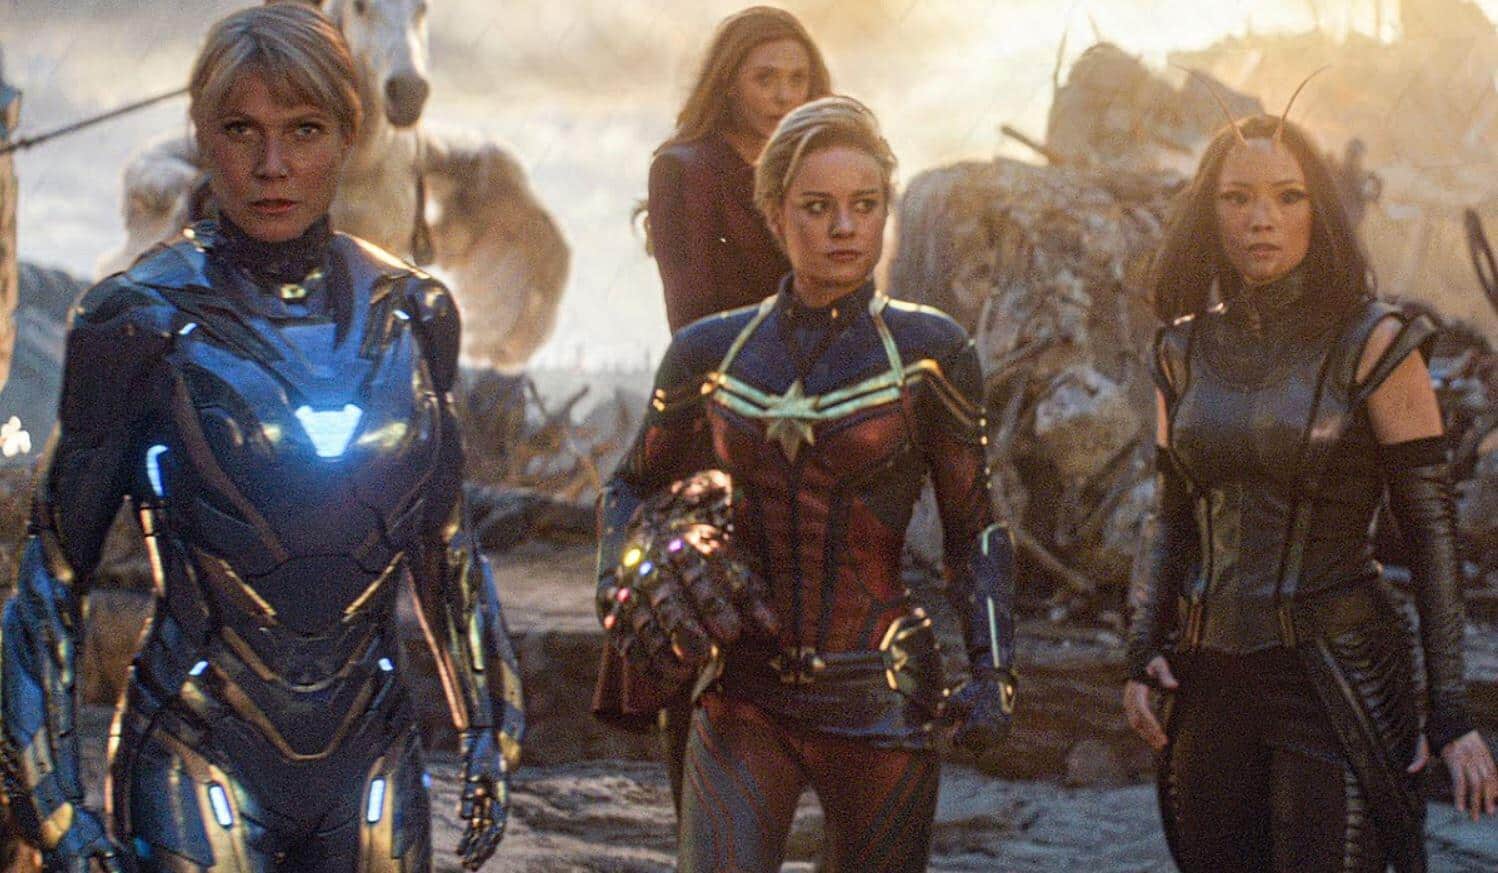 Avengers: Endgame's A-Force moment was originally very different